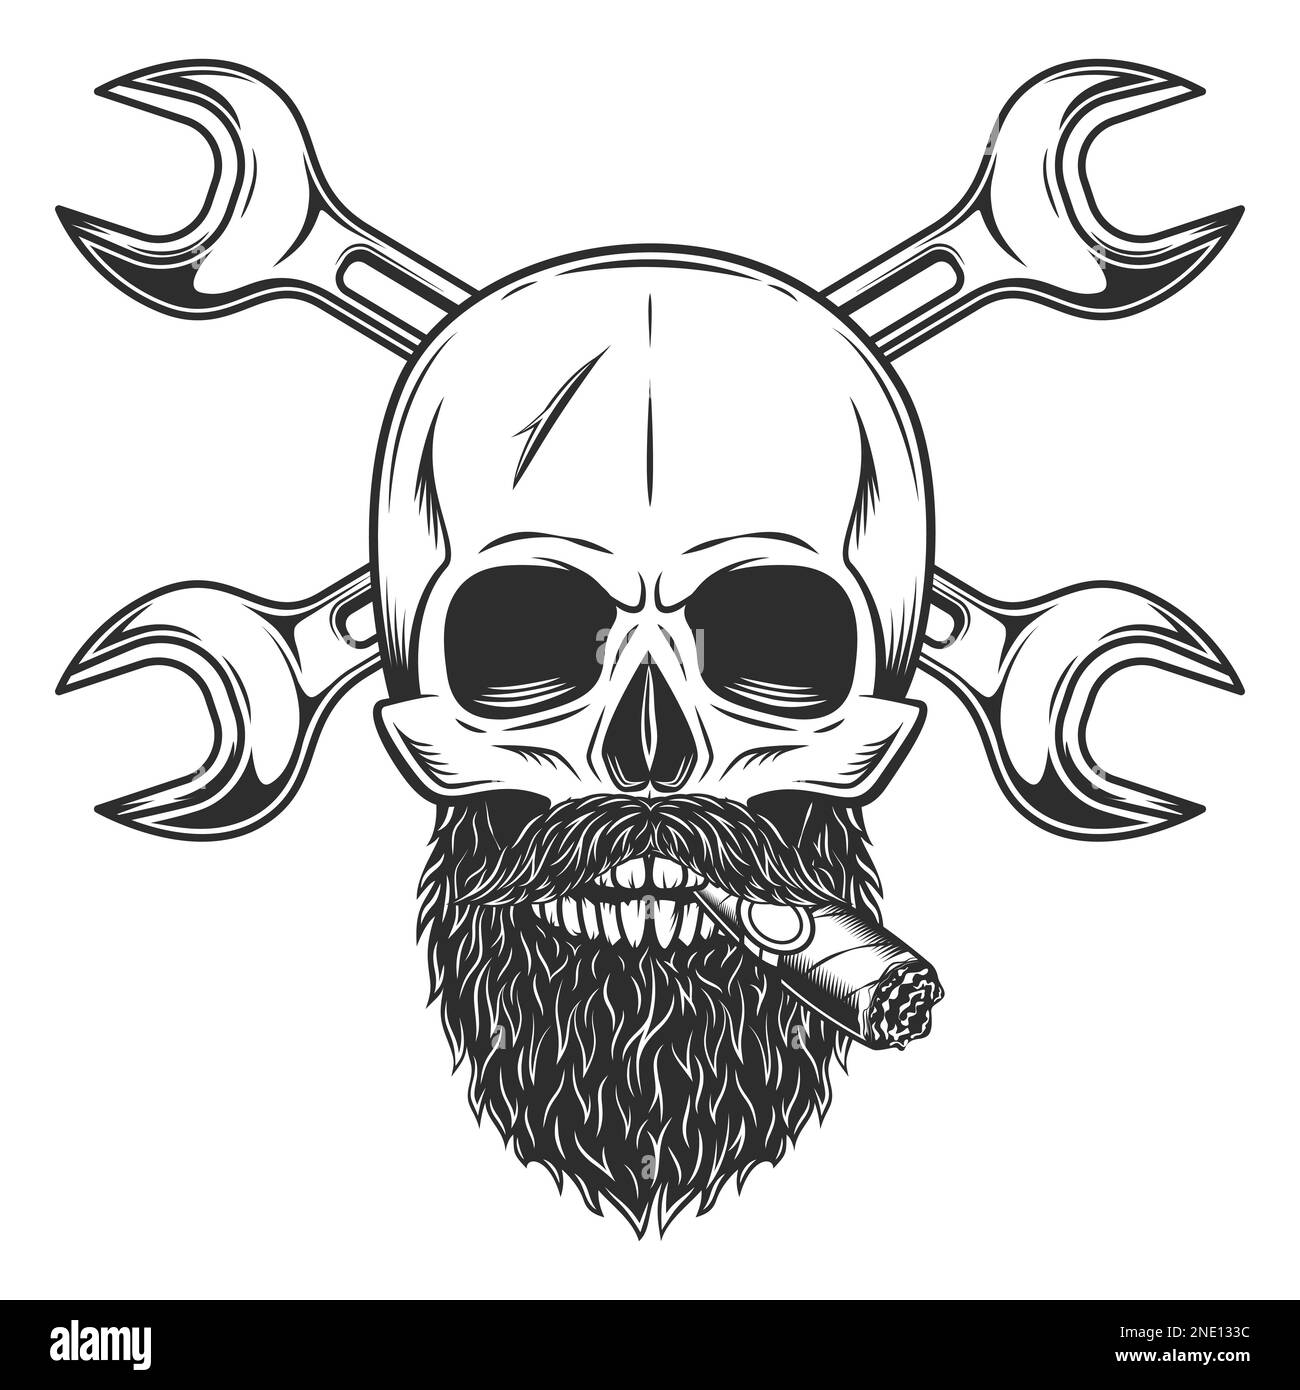 Skull with mustache and beard with smoking cigar or cigarette and construction plumbing wrench or repair car and truck mechanic service tool Stock Vector